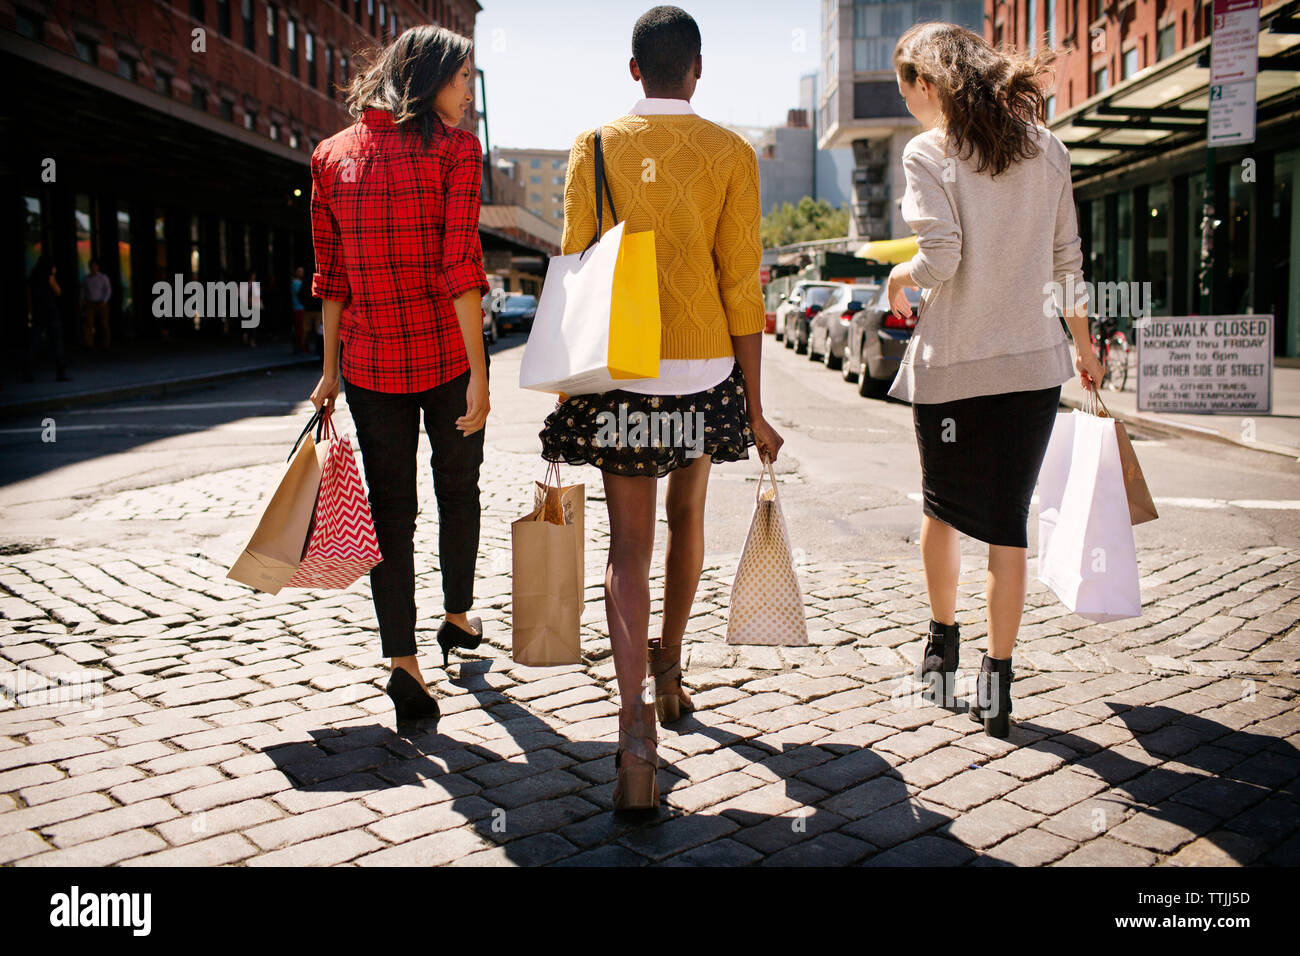 Rear view of women with shopping bags walking on city street Stock Photo